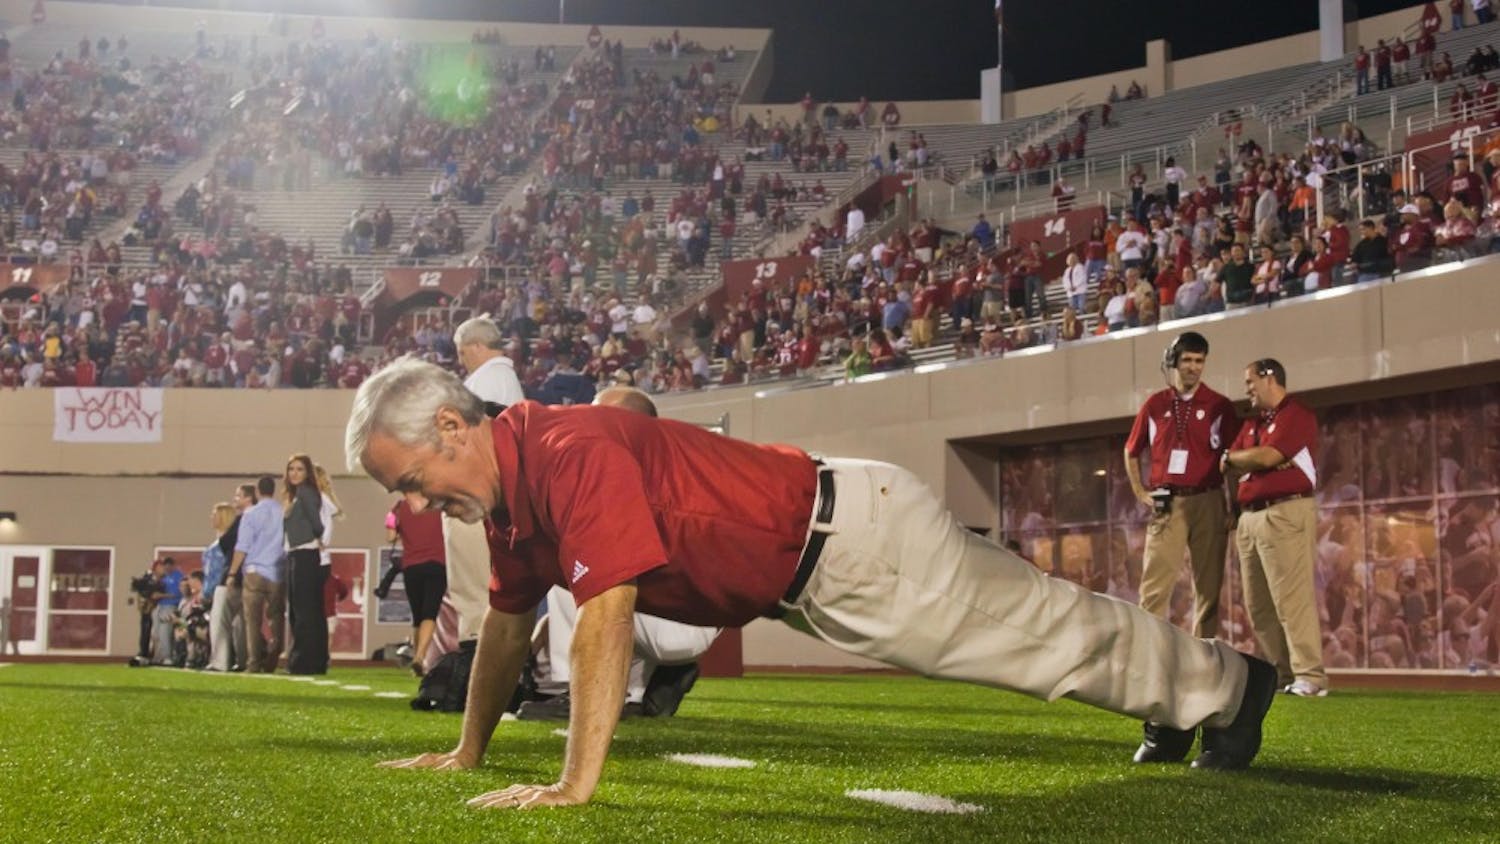 Tom Bush does pushups in the north end zone of Memorial Stadium during an IU football game. Since he started doing push-ups in 2005, he's done 12,291 through the 2016 season.